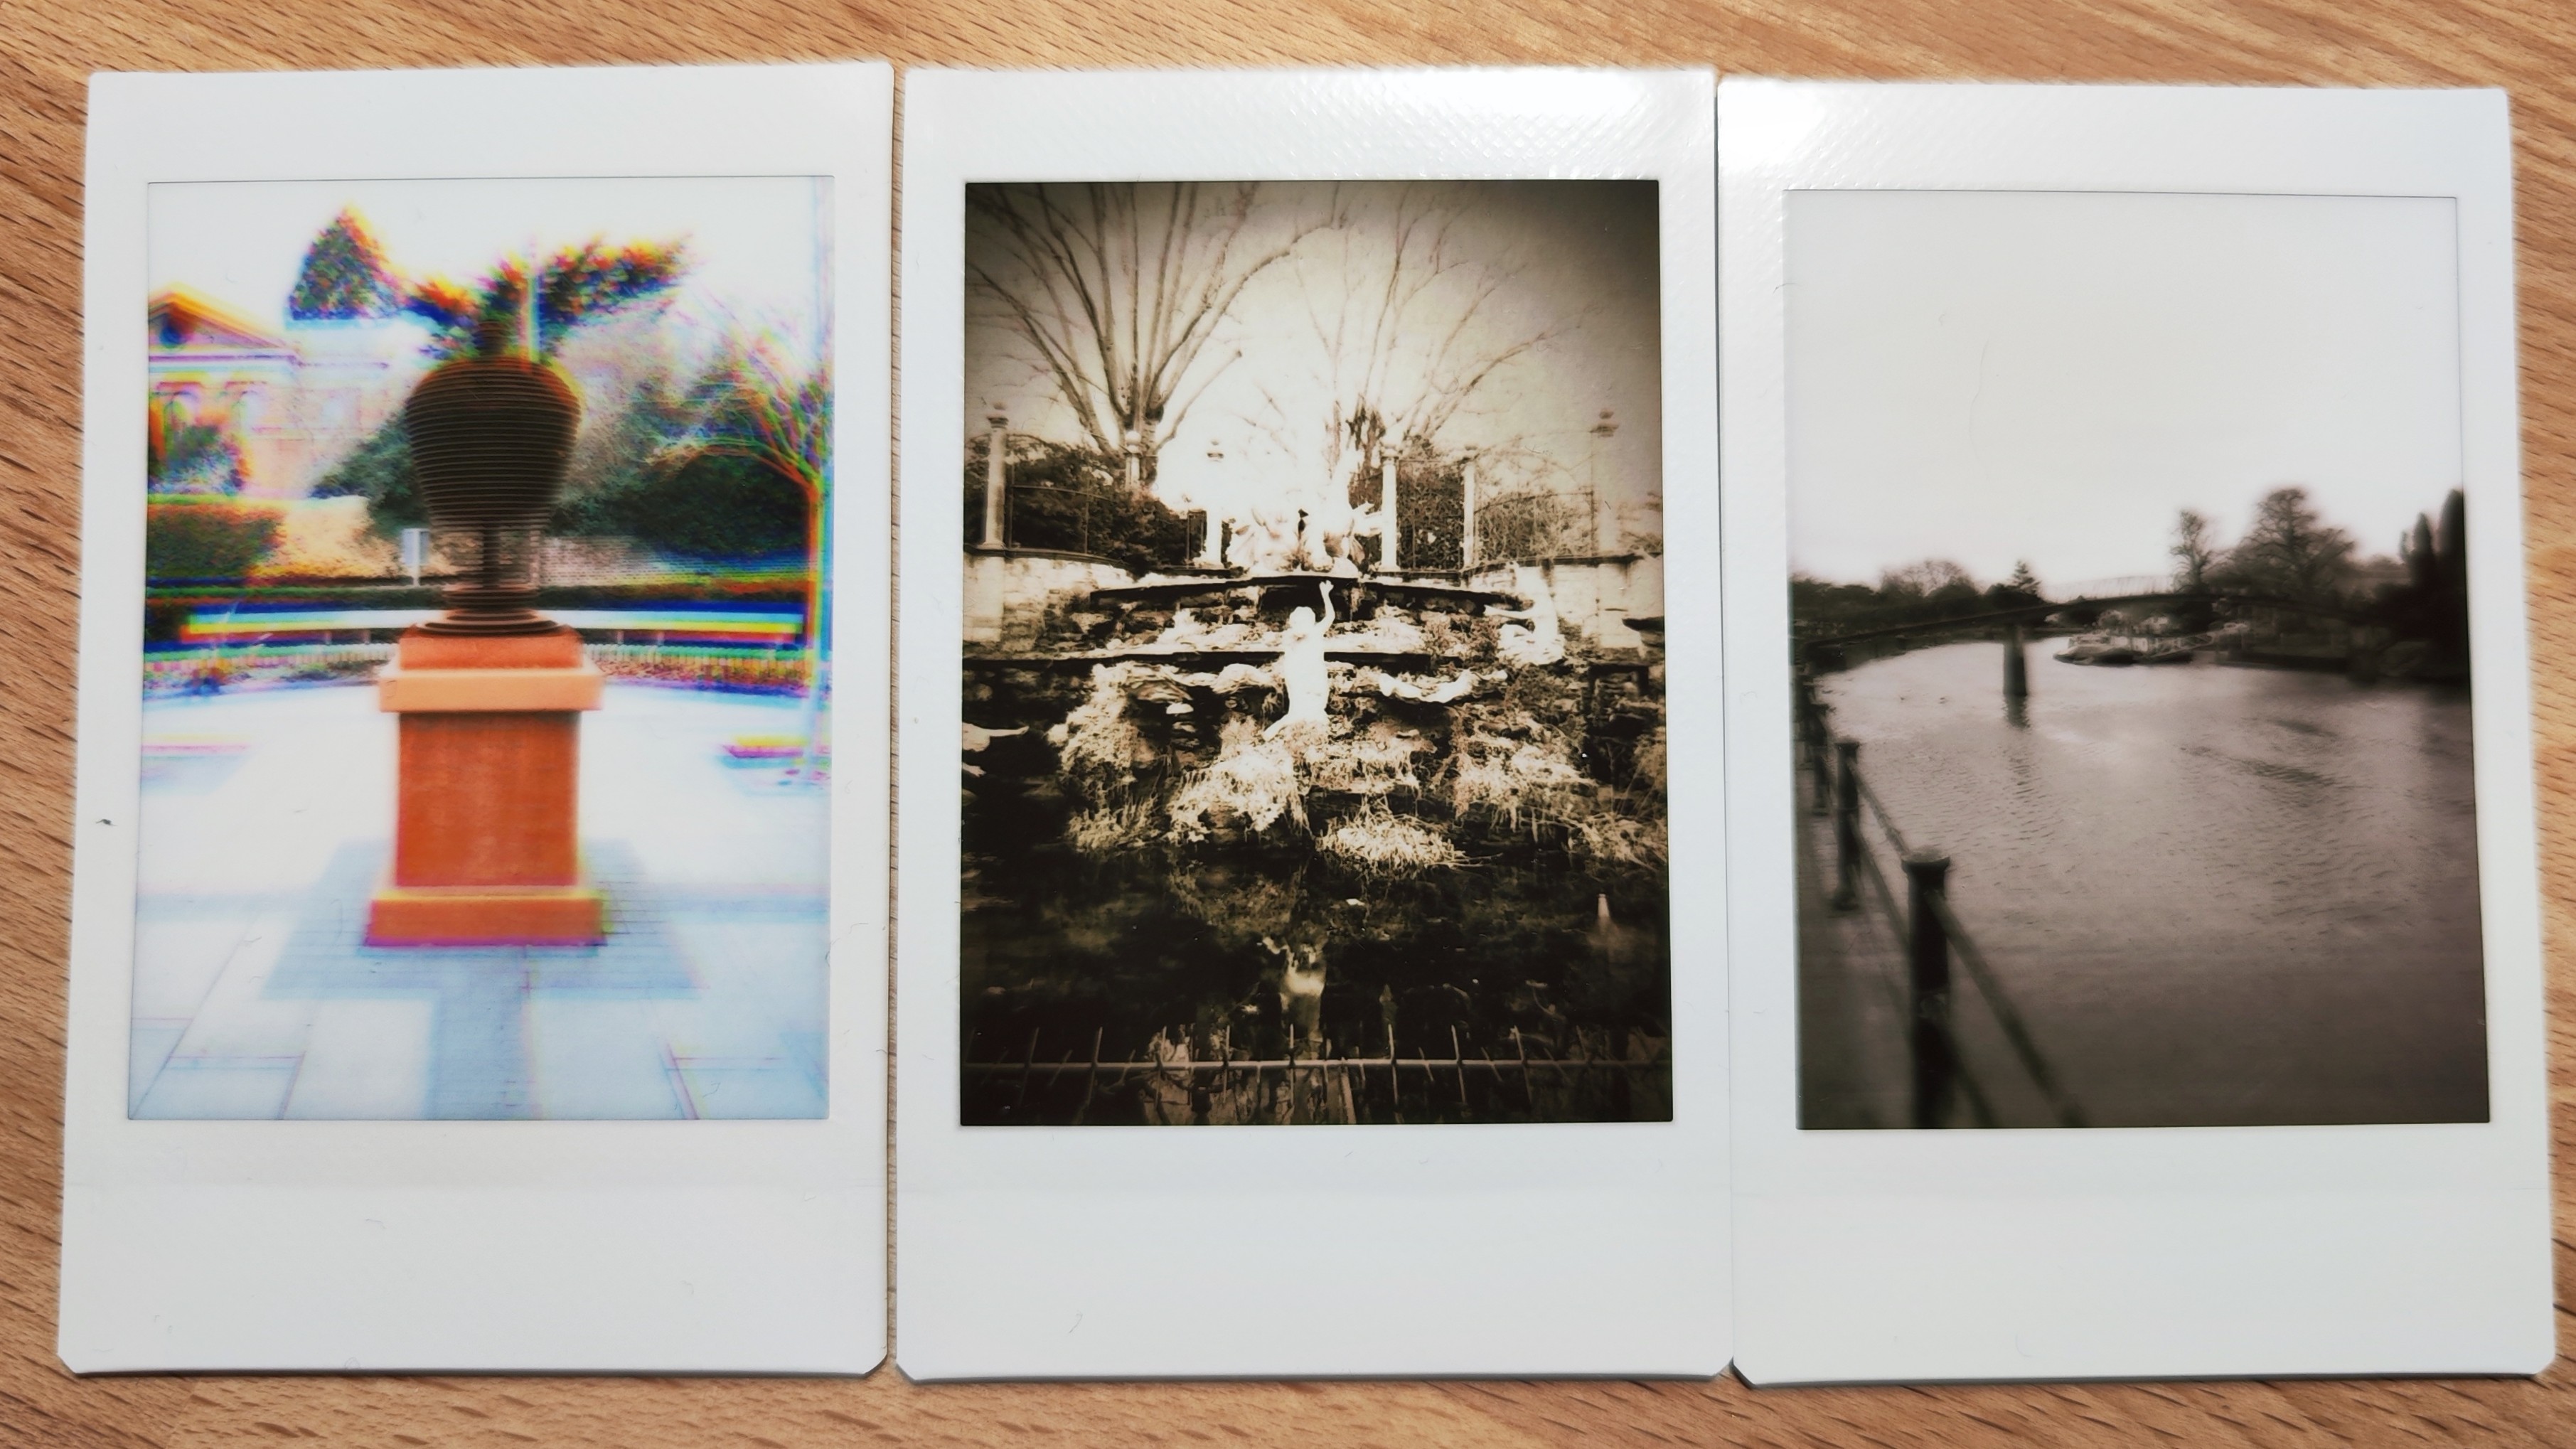 Instant photos on a wooden table